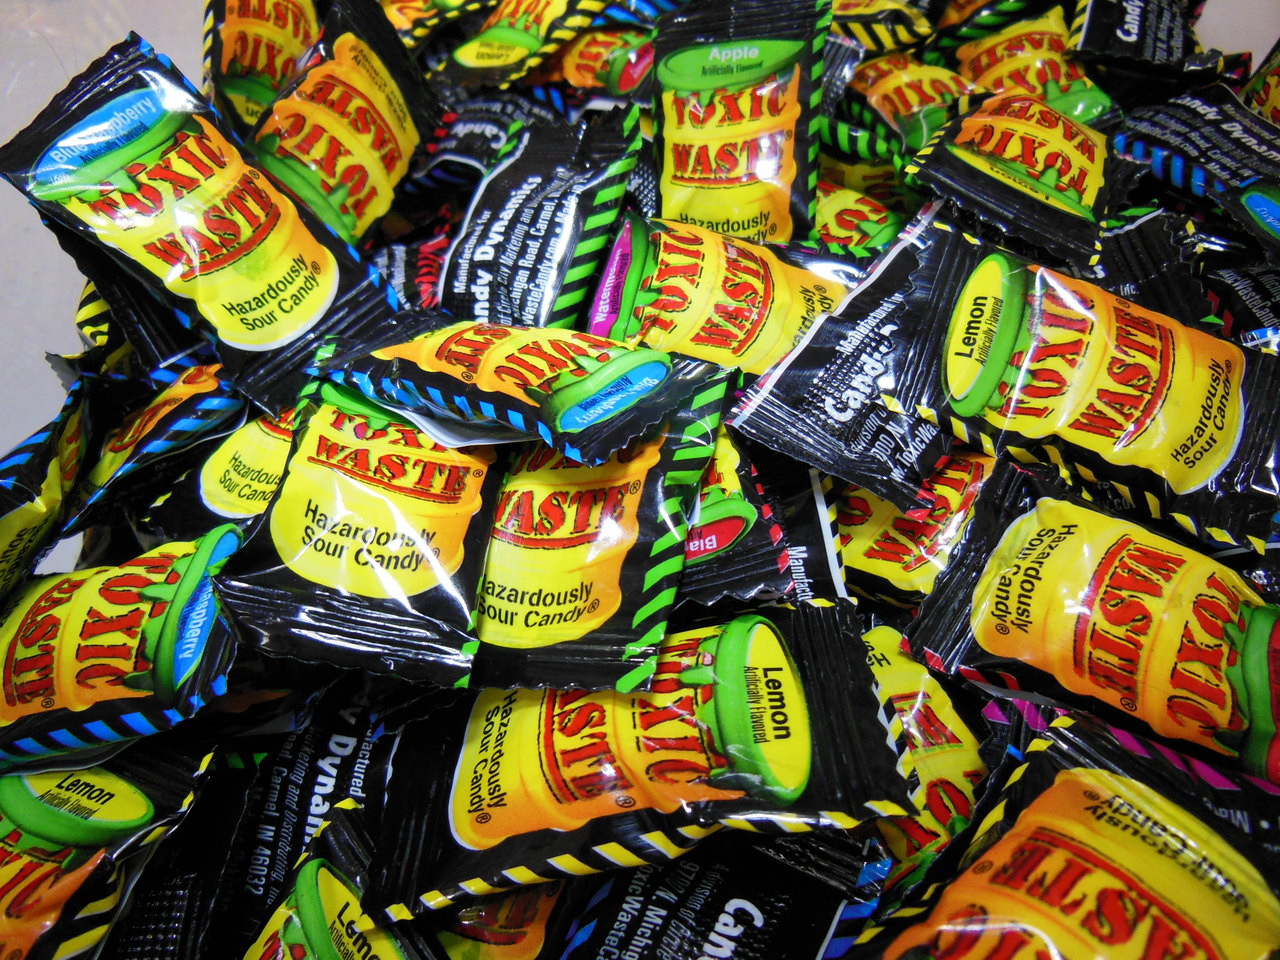 Toxic Waste Sour Candy 1 Lb Candy Dynamics